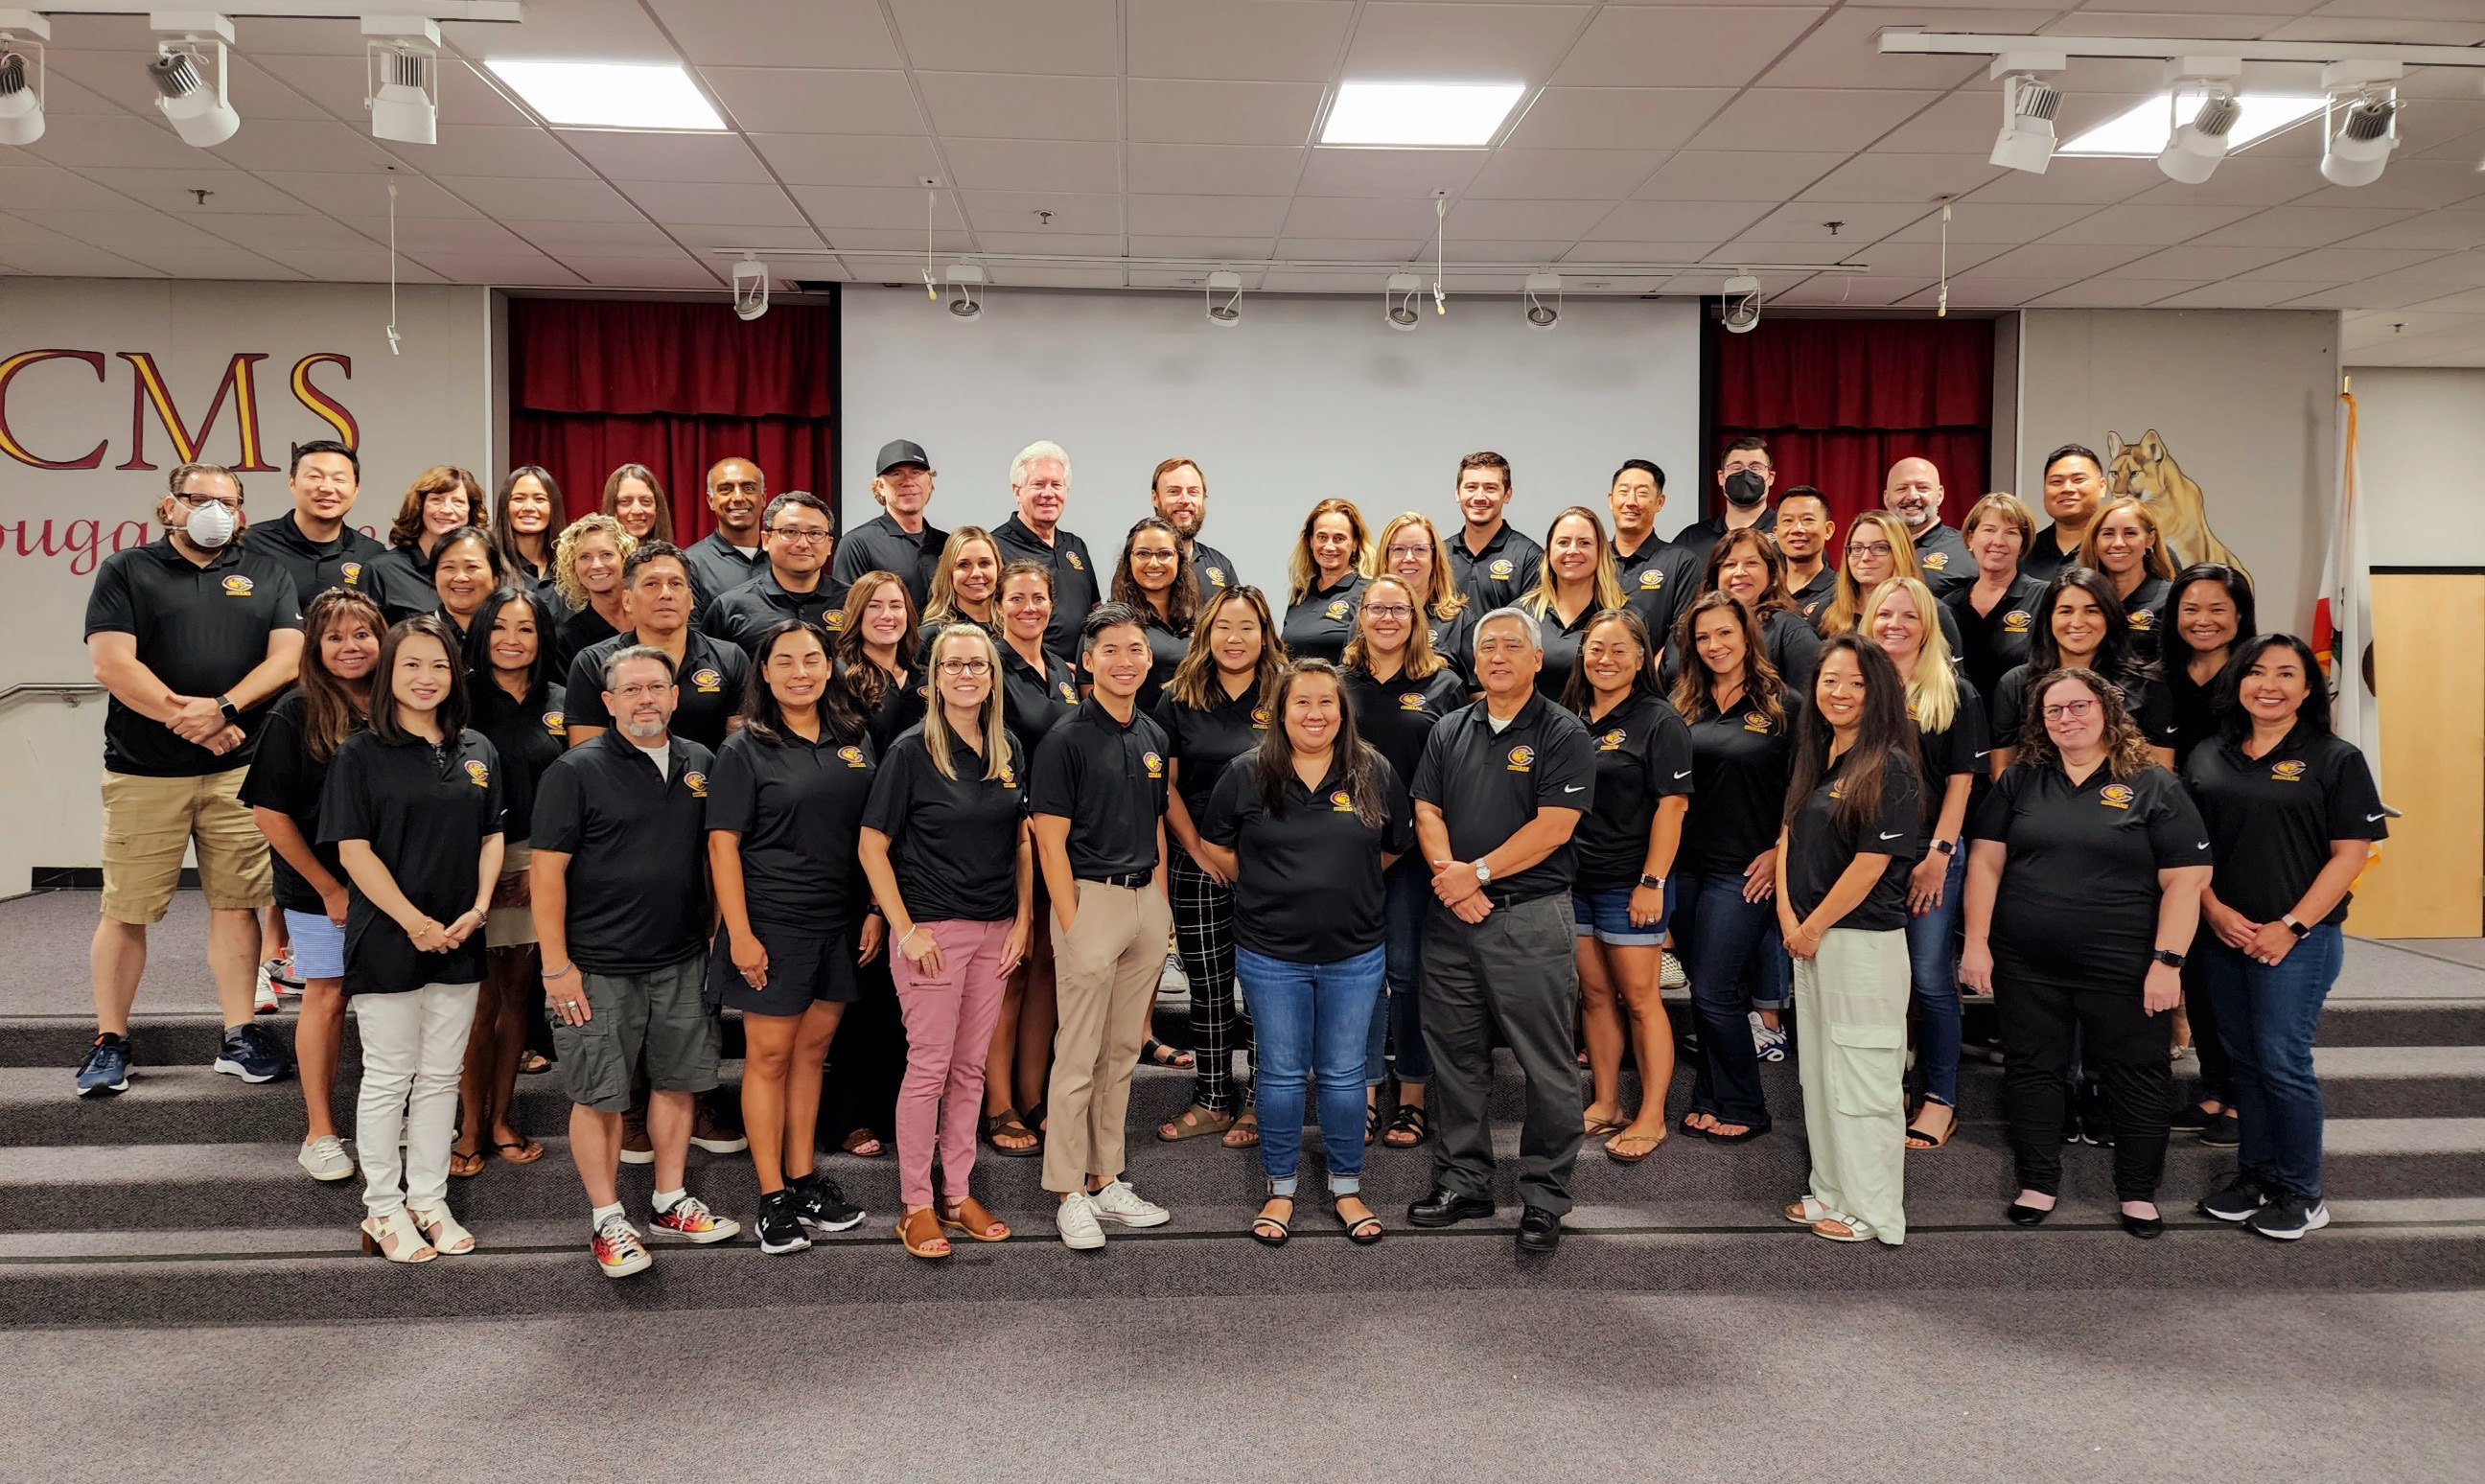 Caparral Middle School Staff